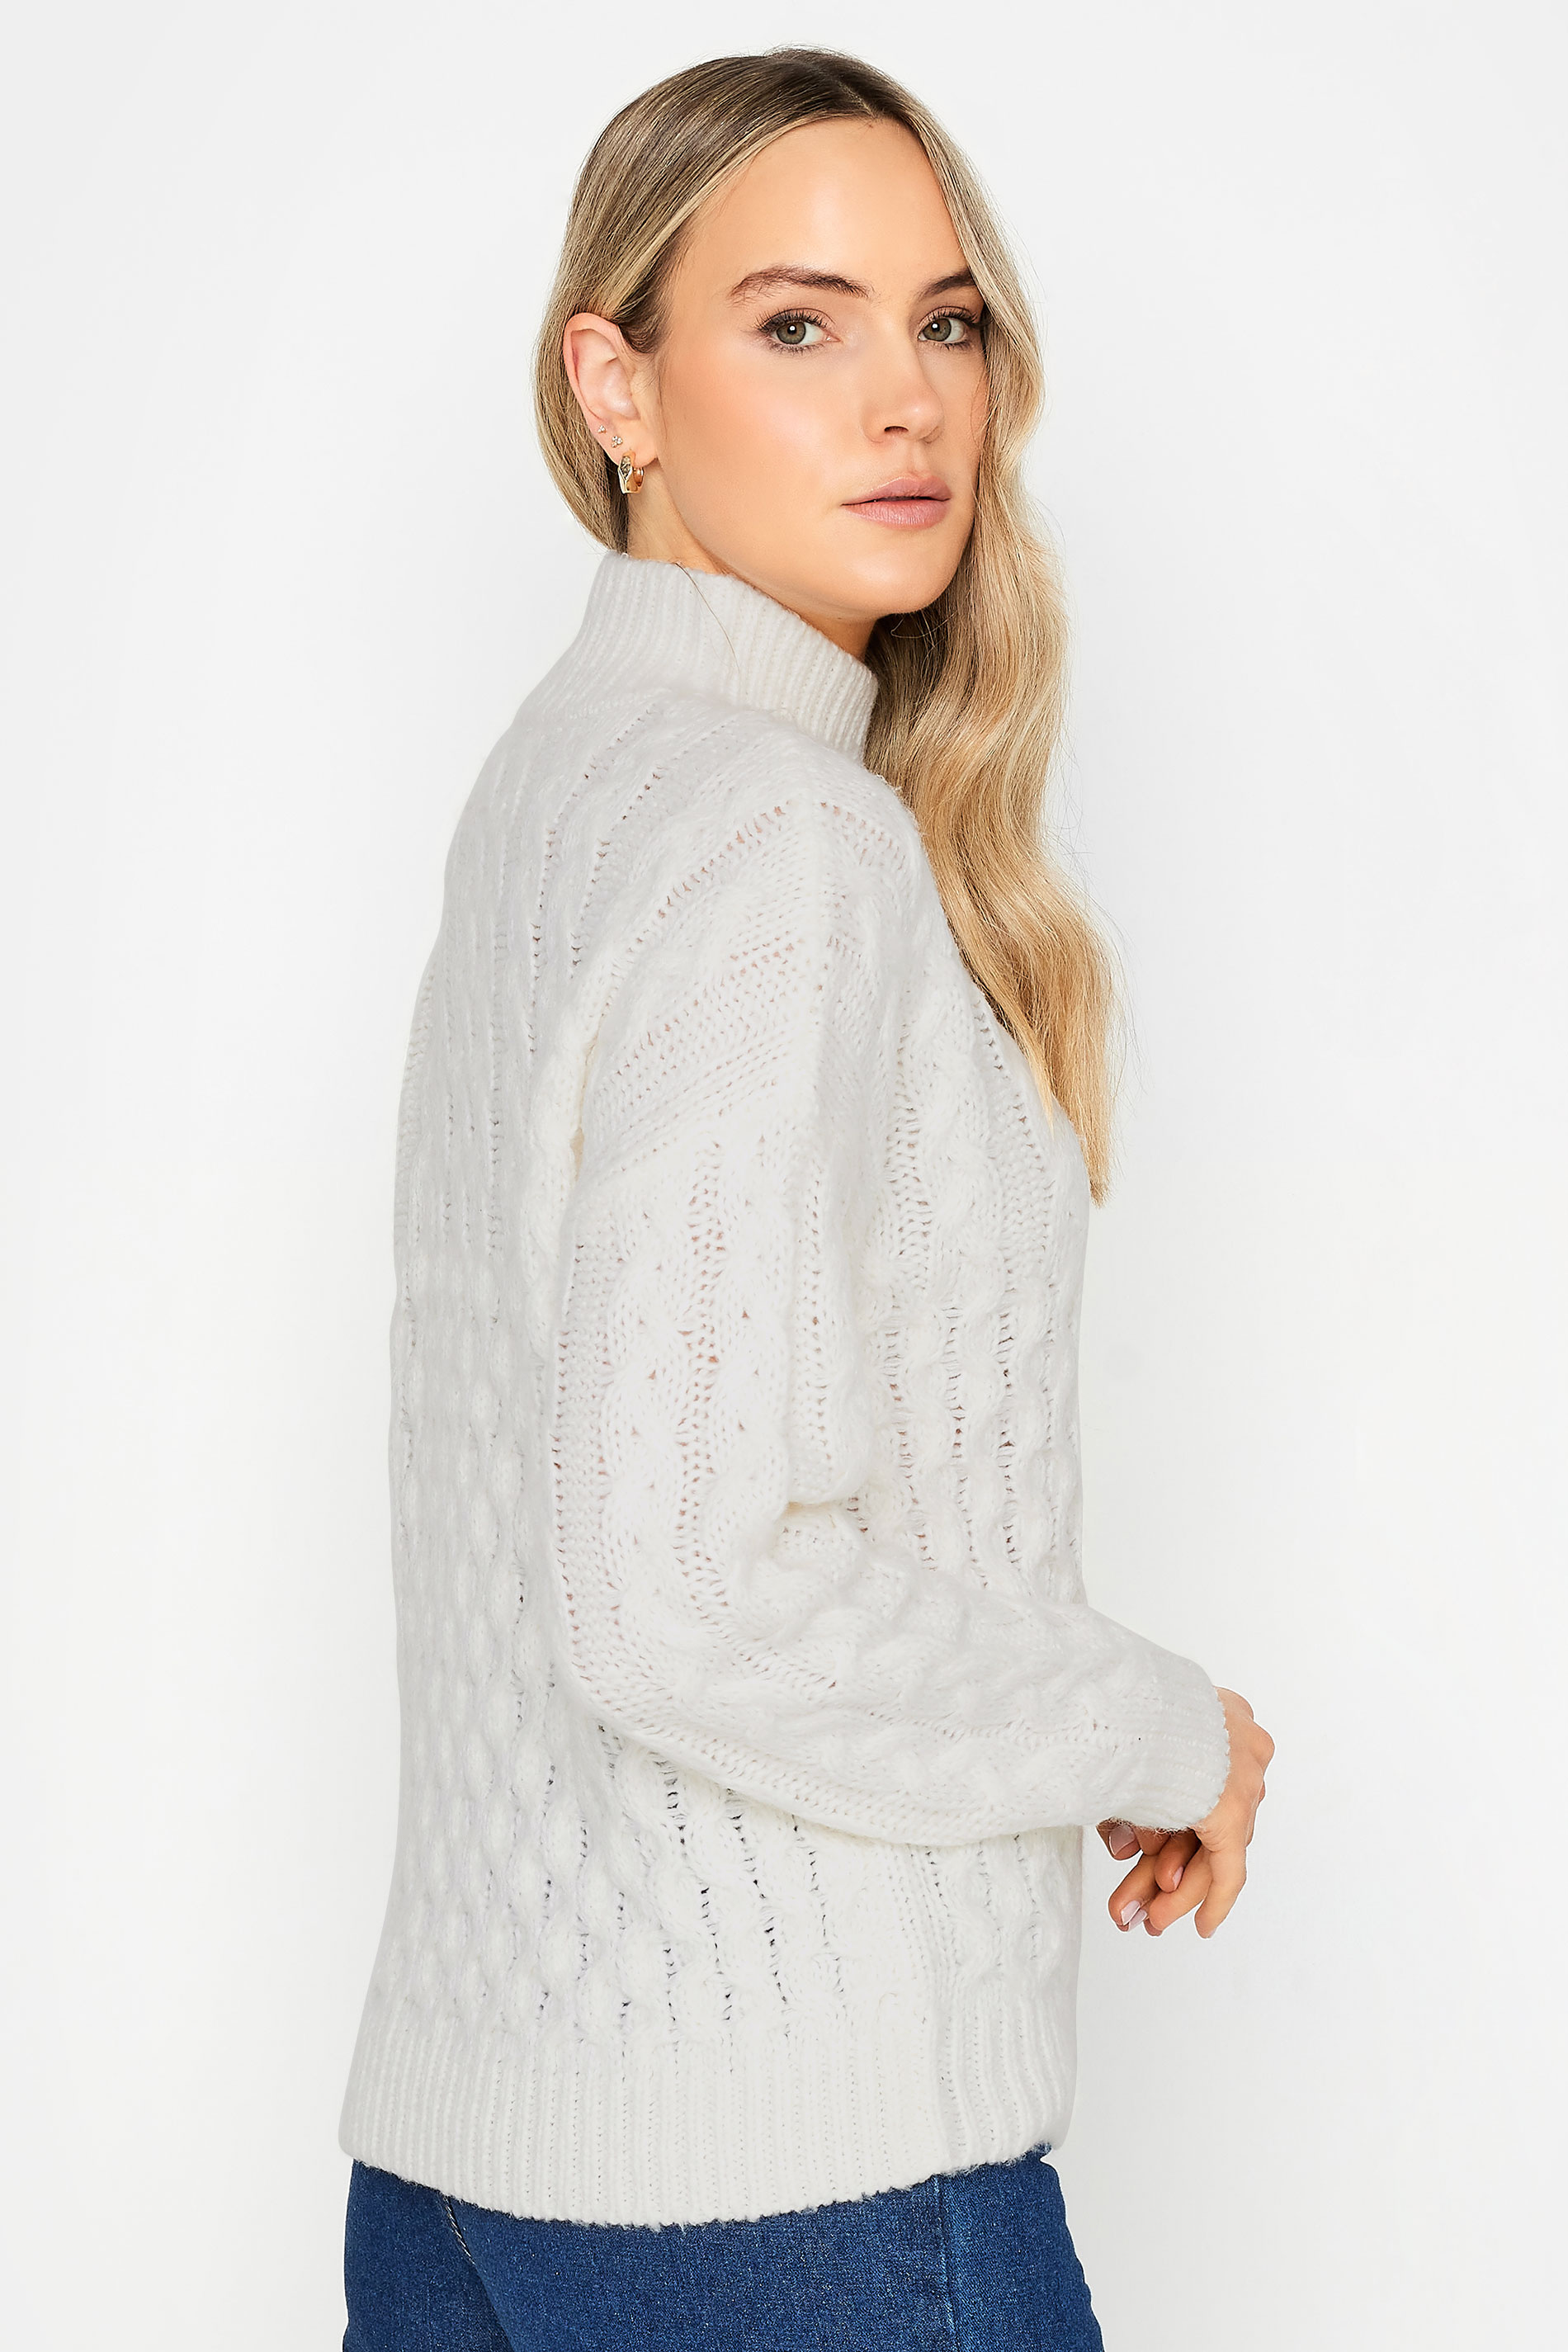 LTS Tall Womens Ivory White Cable Knit Turtle Neck Jumper | Long Tall Sally  3